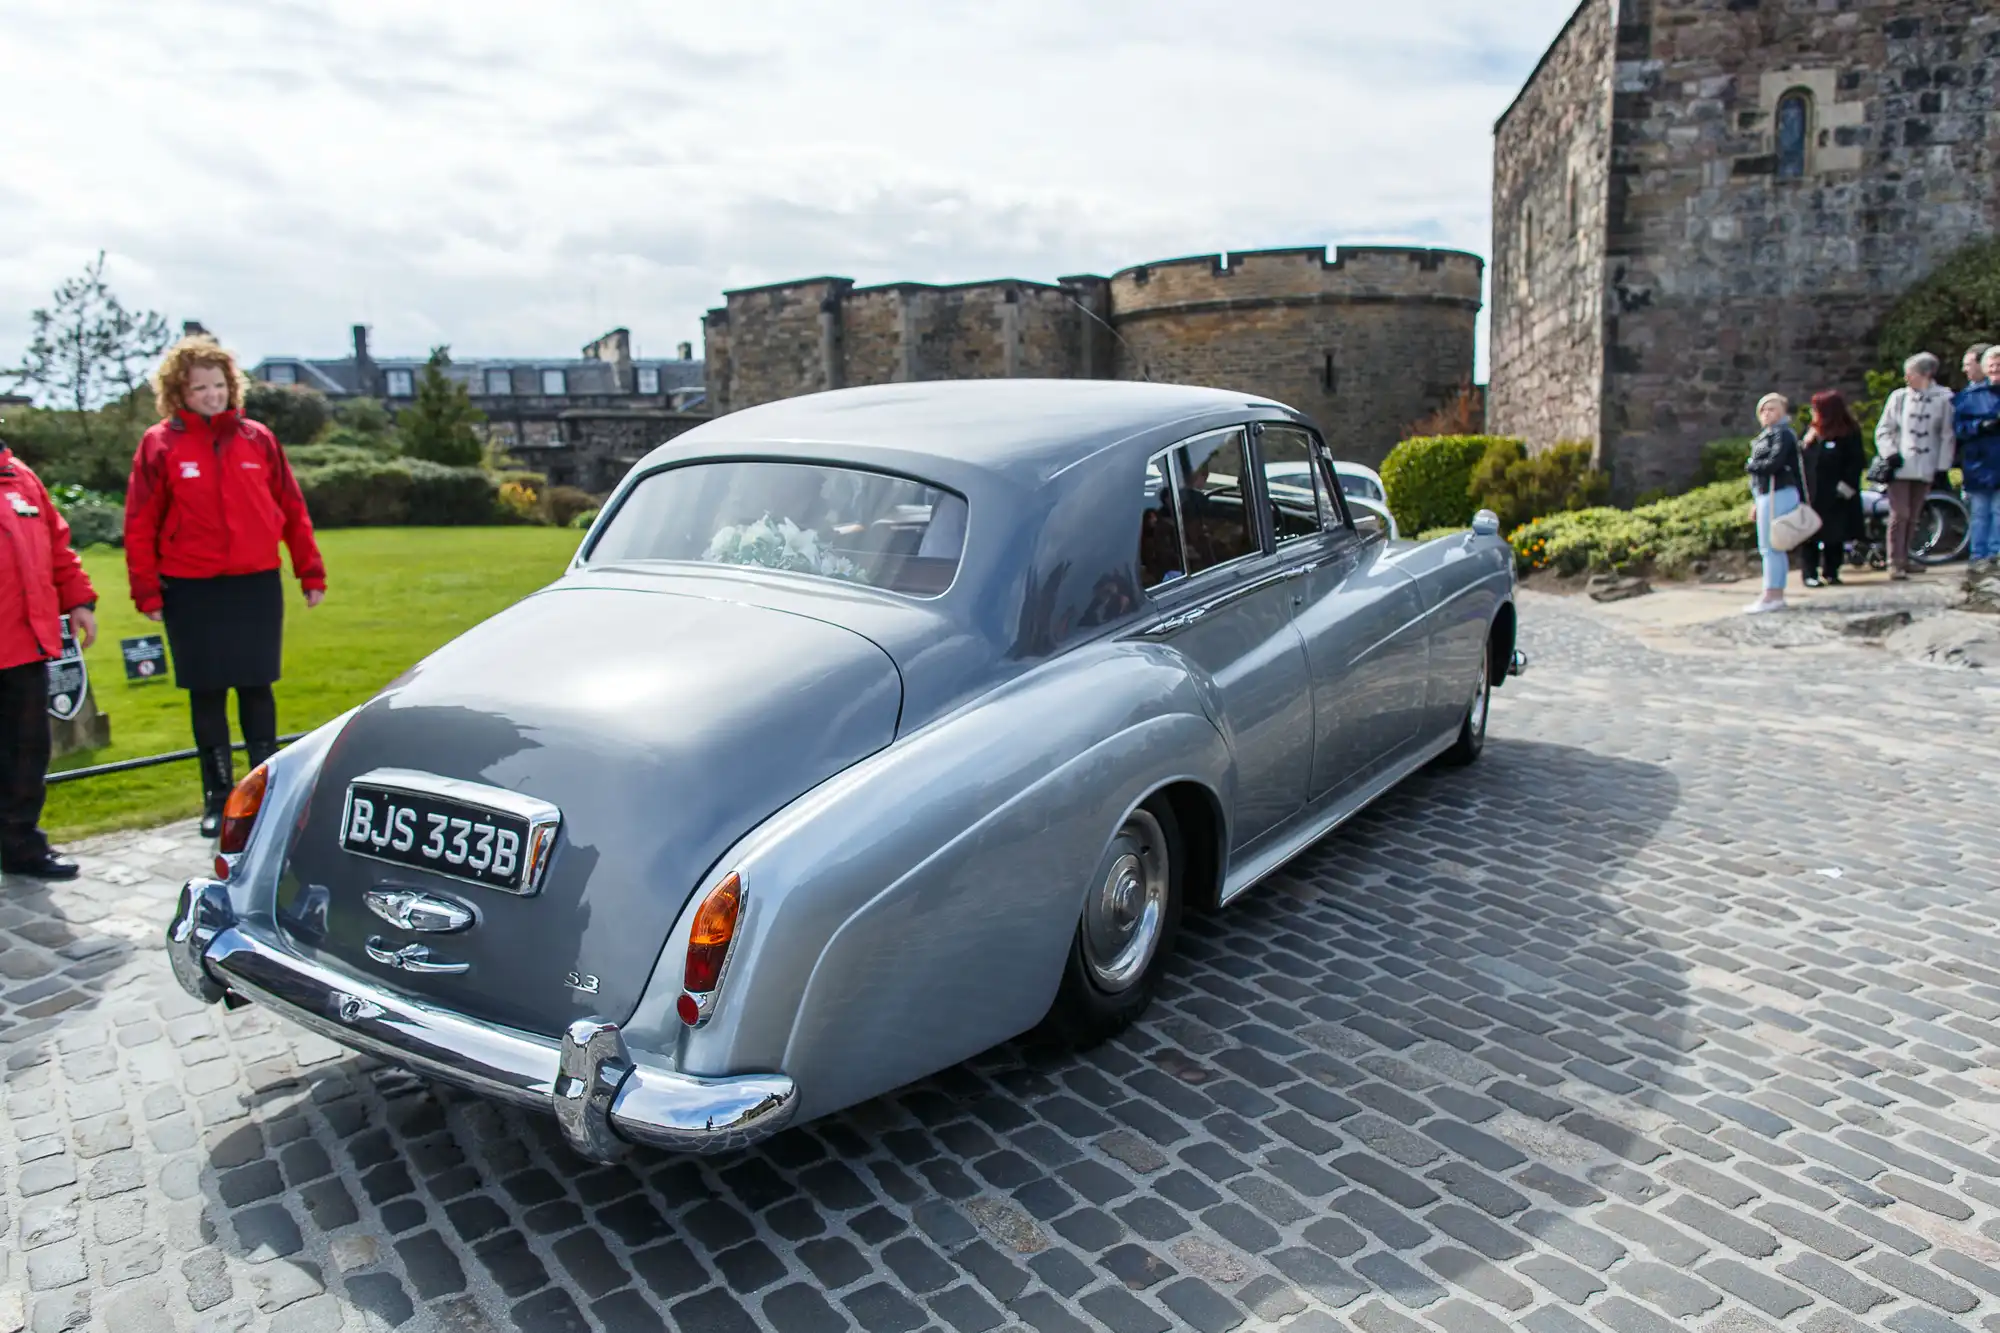 A vintage silver rolls-royce parked on cobblestones near a historic castle, with people walking around.